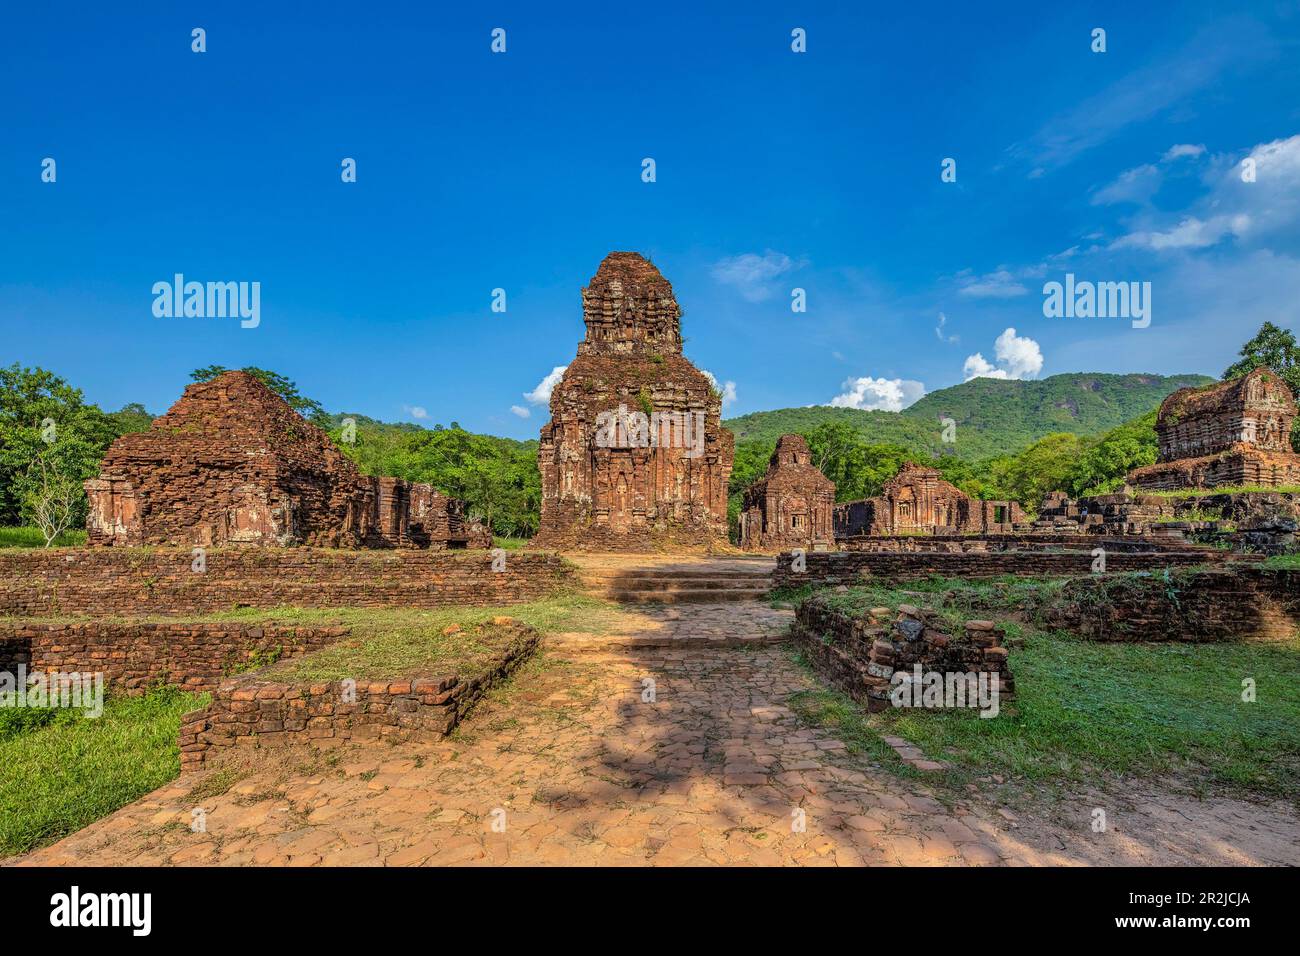 MY SON SANCTUARY IS A LARGE COMPLEX OF RELIGIOUS RELICS COMPRISES CHAM ARCHITECTURAL WORKS. A UNESCO WORLD HERITAGE SITE IN QUANG NAM, VIETNAM. Stock Photo